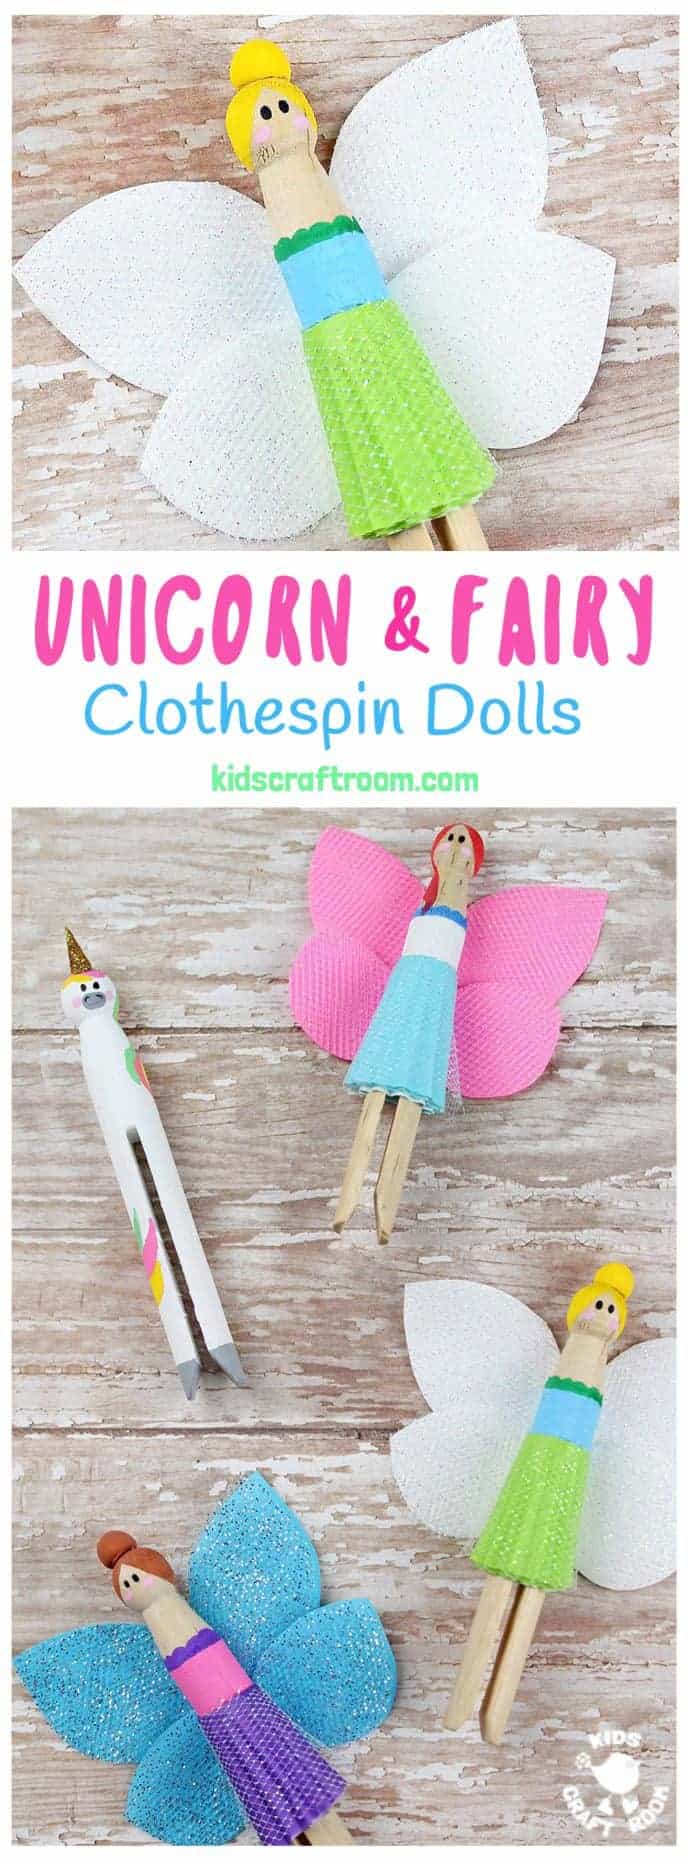 Fairy and Unicorn Clothespin Dolls are a delightful spin on traditional peg dolls! Simple to make and quite magical! Everyone will love these pocket sized homemade dolls to play with.